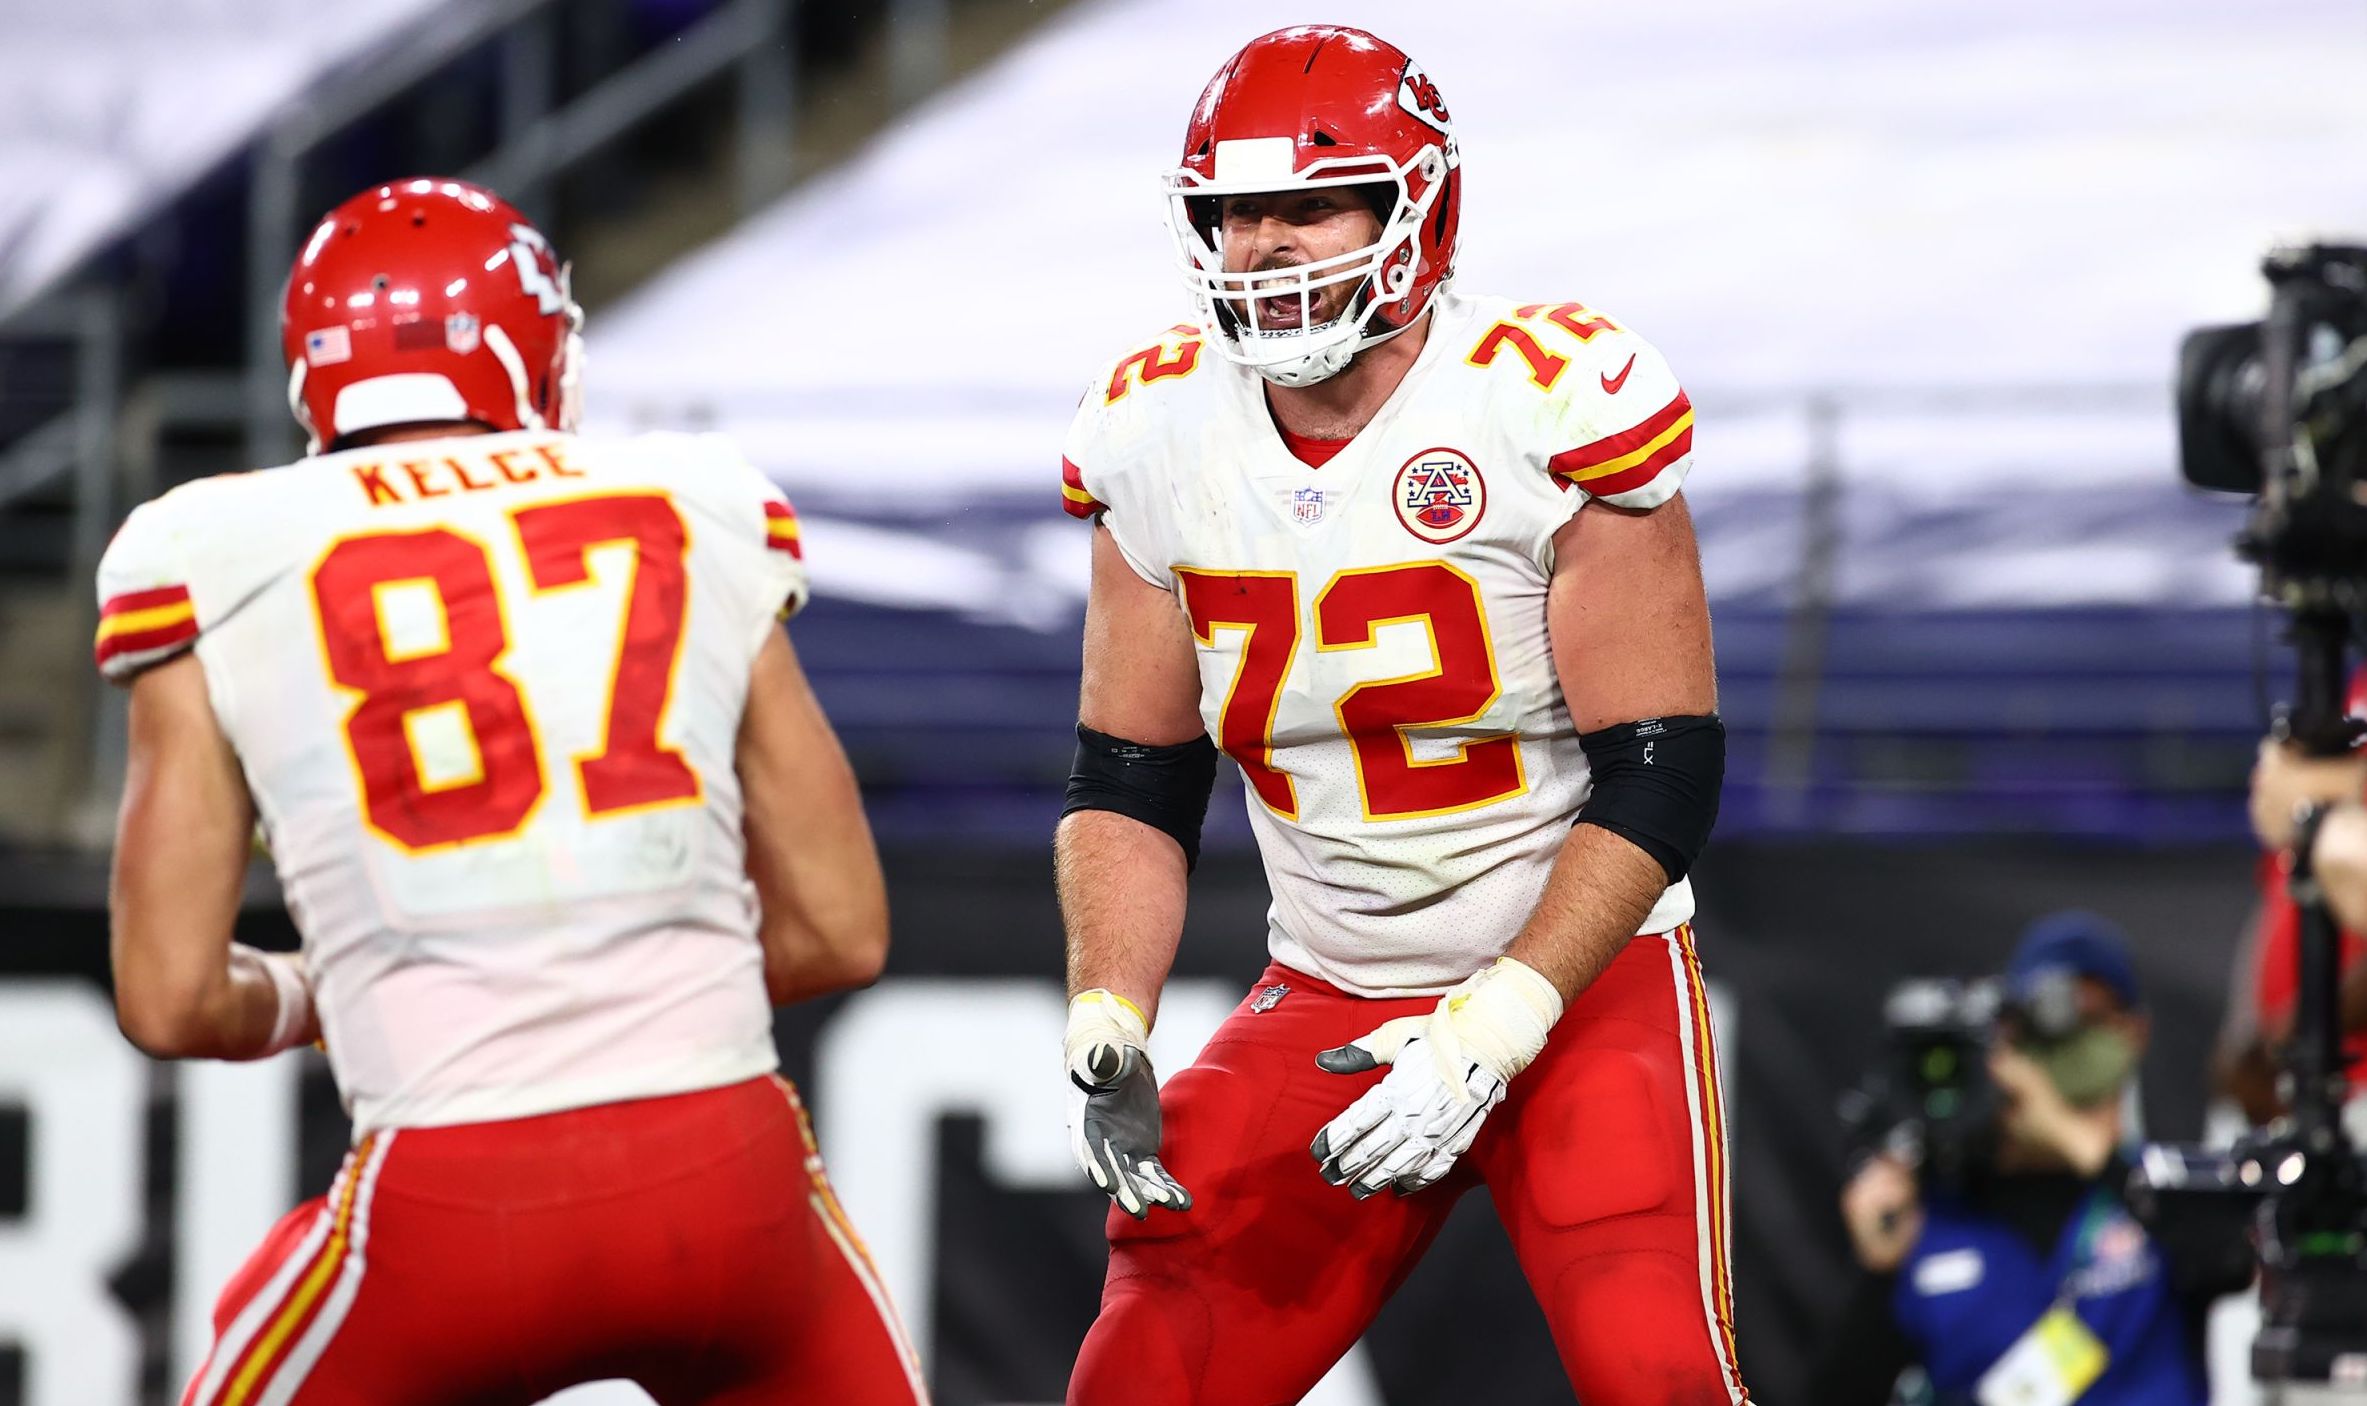 NOTEBOOK: Eric Fisher Gets in End Zone, Chris Jones Exits with Groin Injury